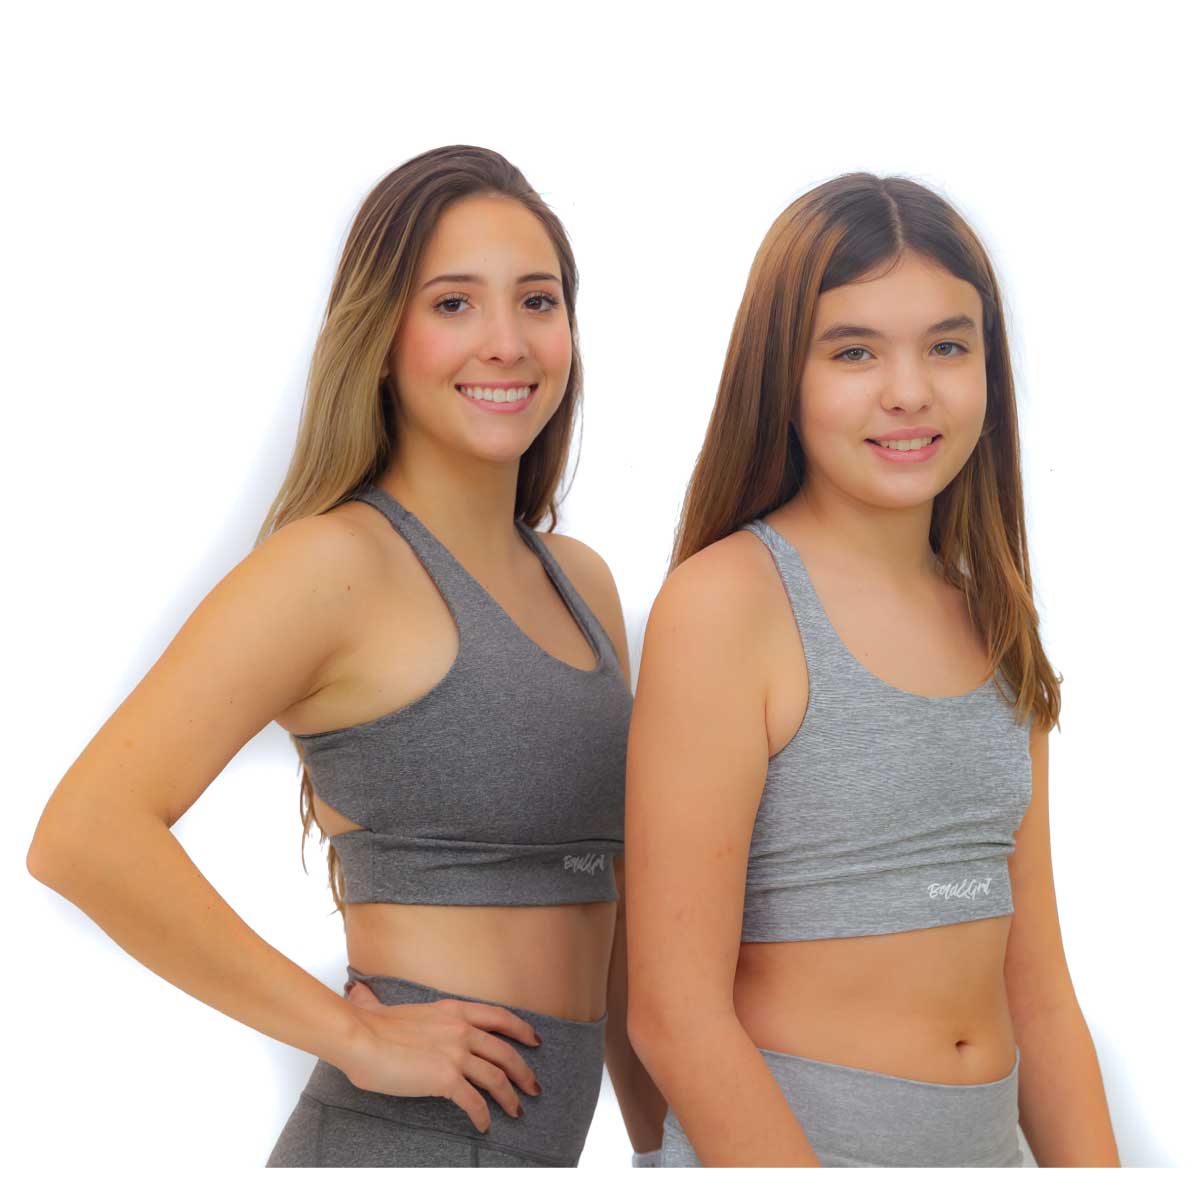 Koral - The Endpoint Energy Sports Bra